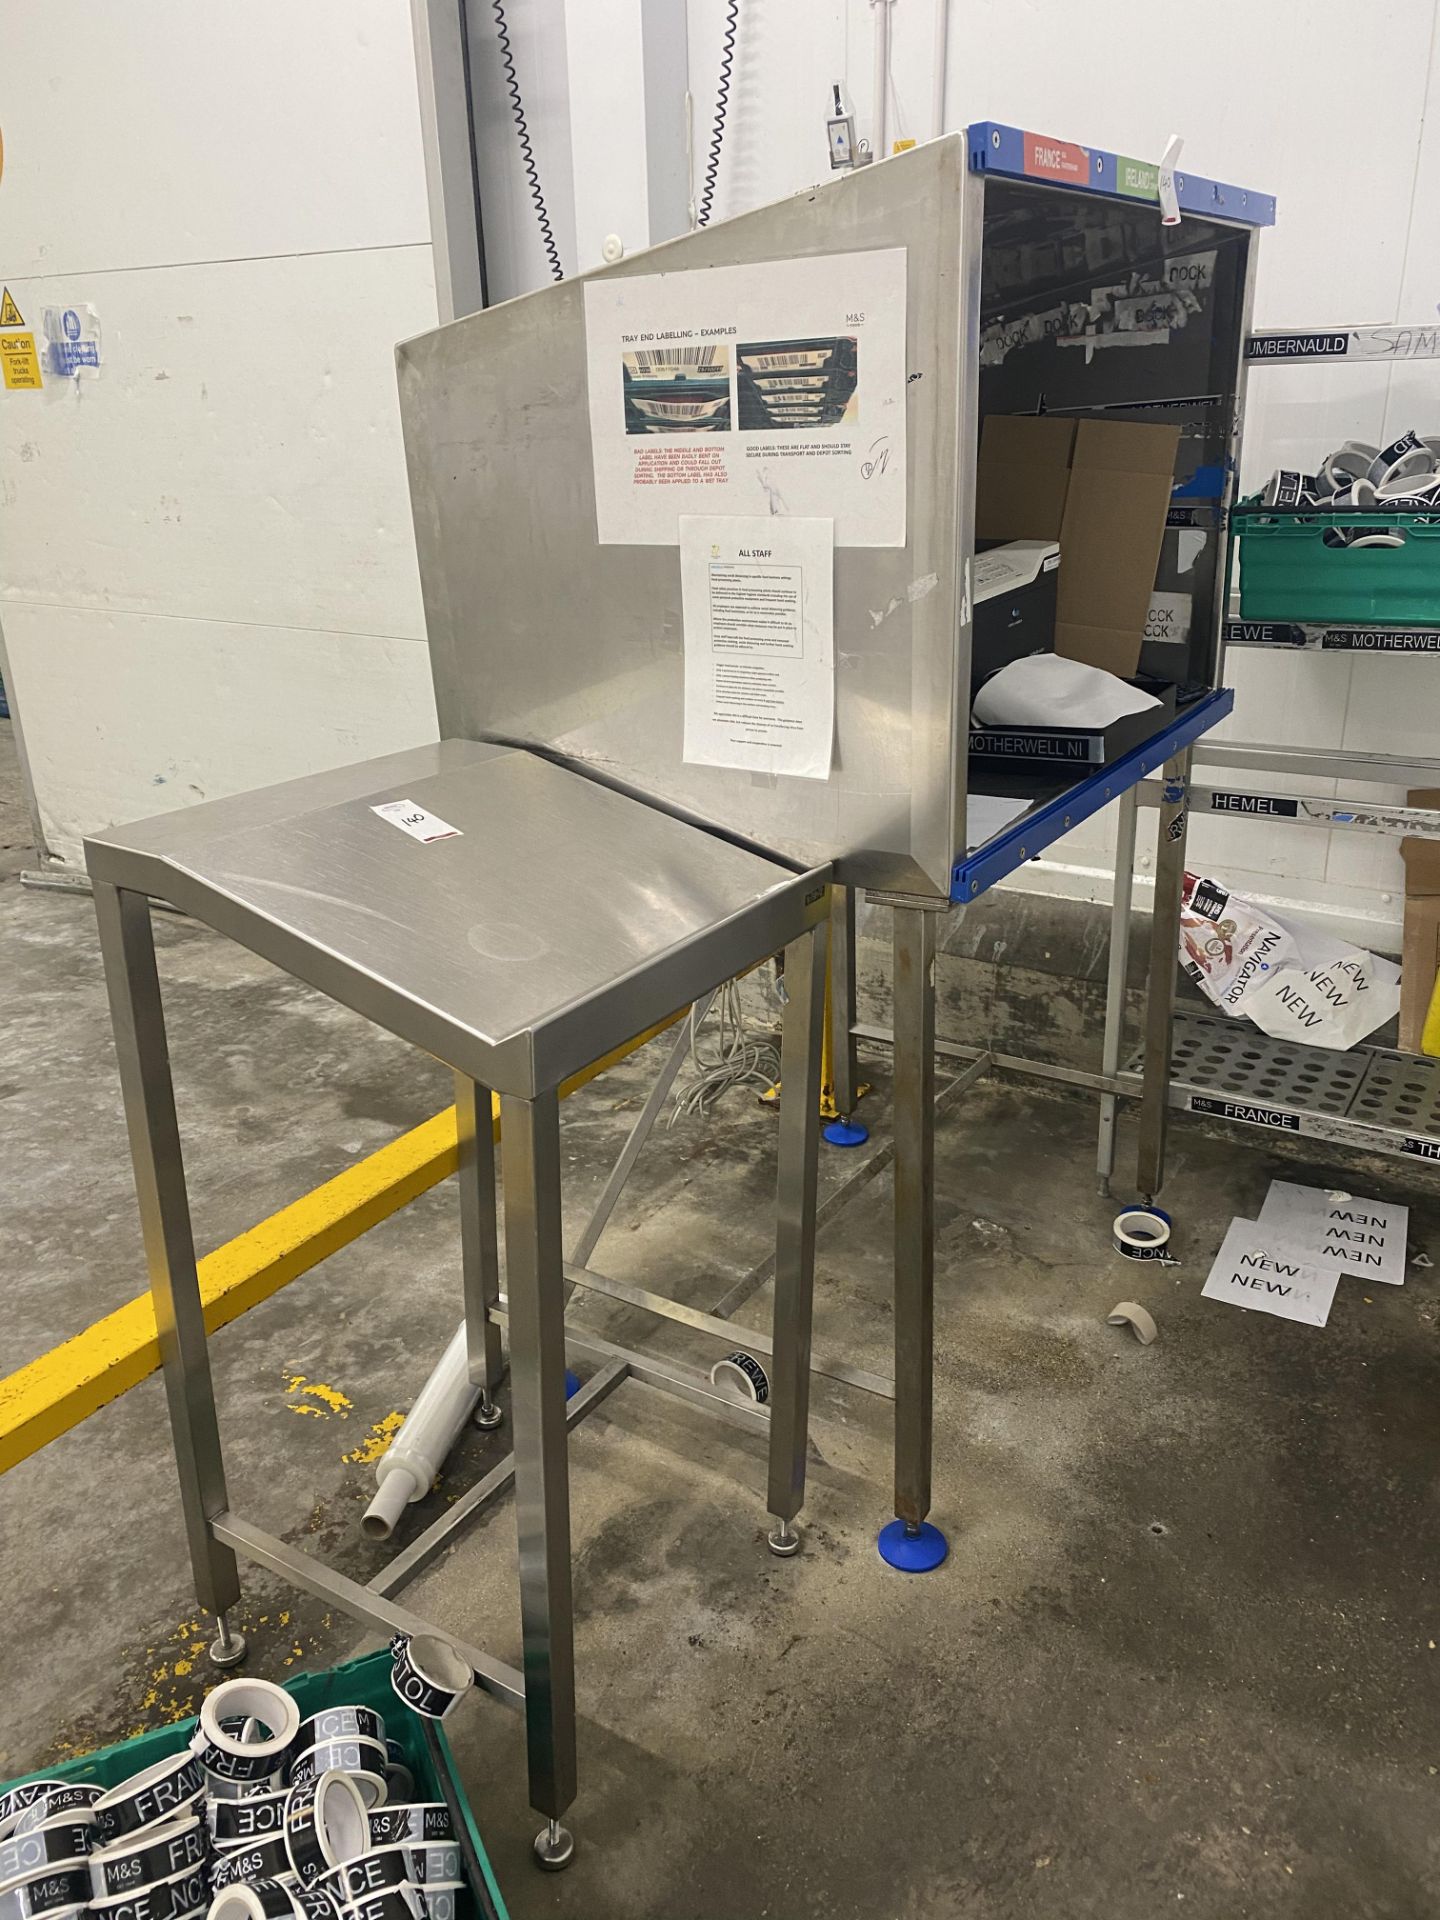 Stainless steel work station with stainless steel lecturn and Fermoo stainless steel shelfing unit